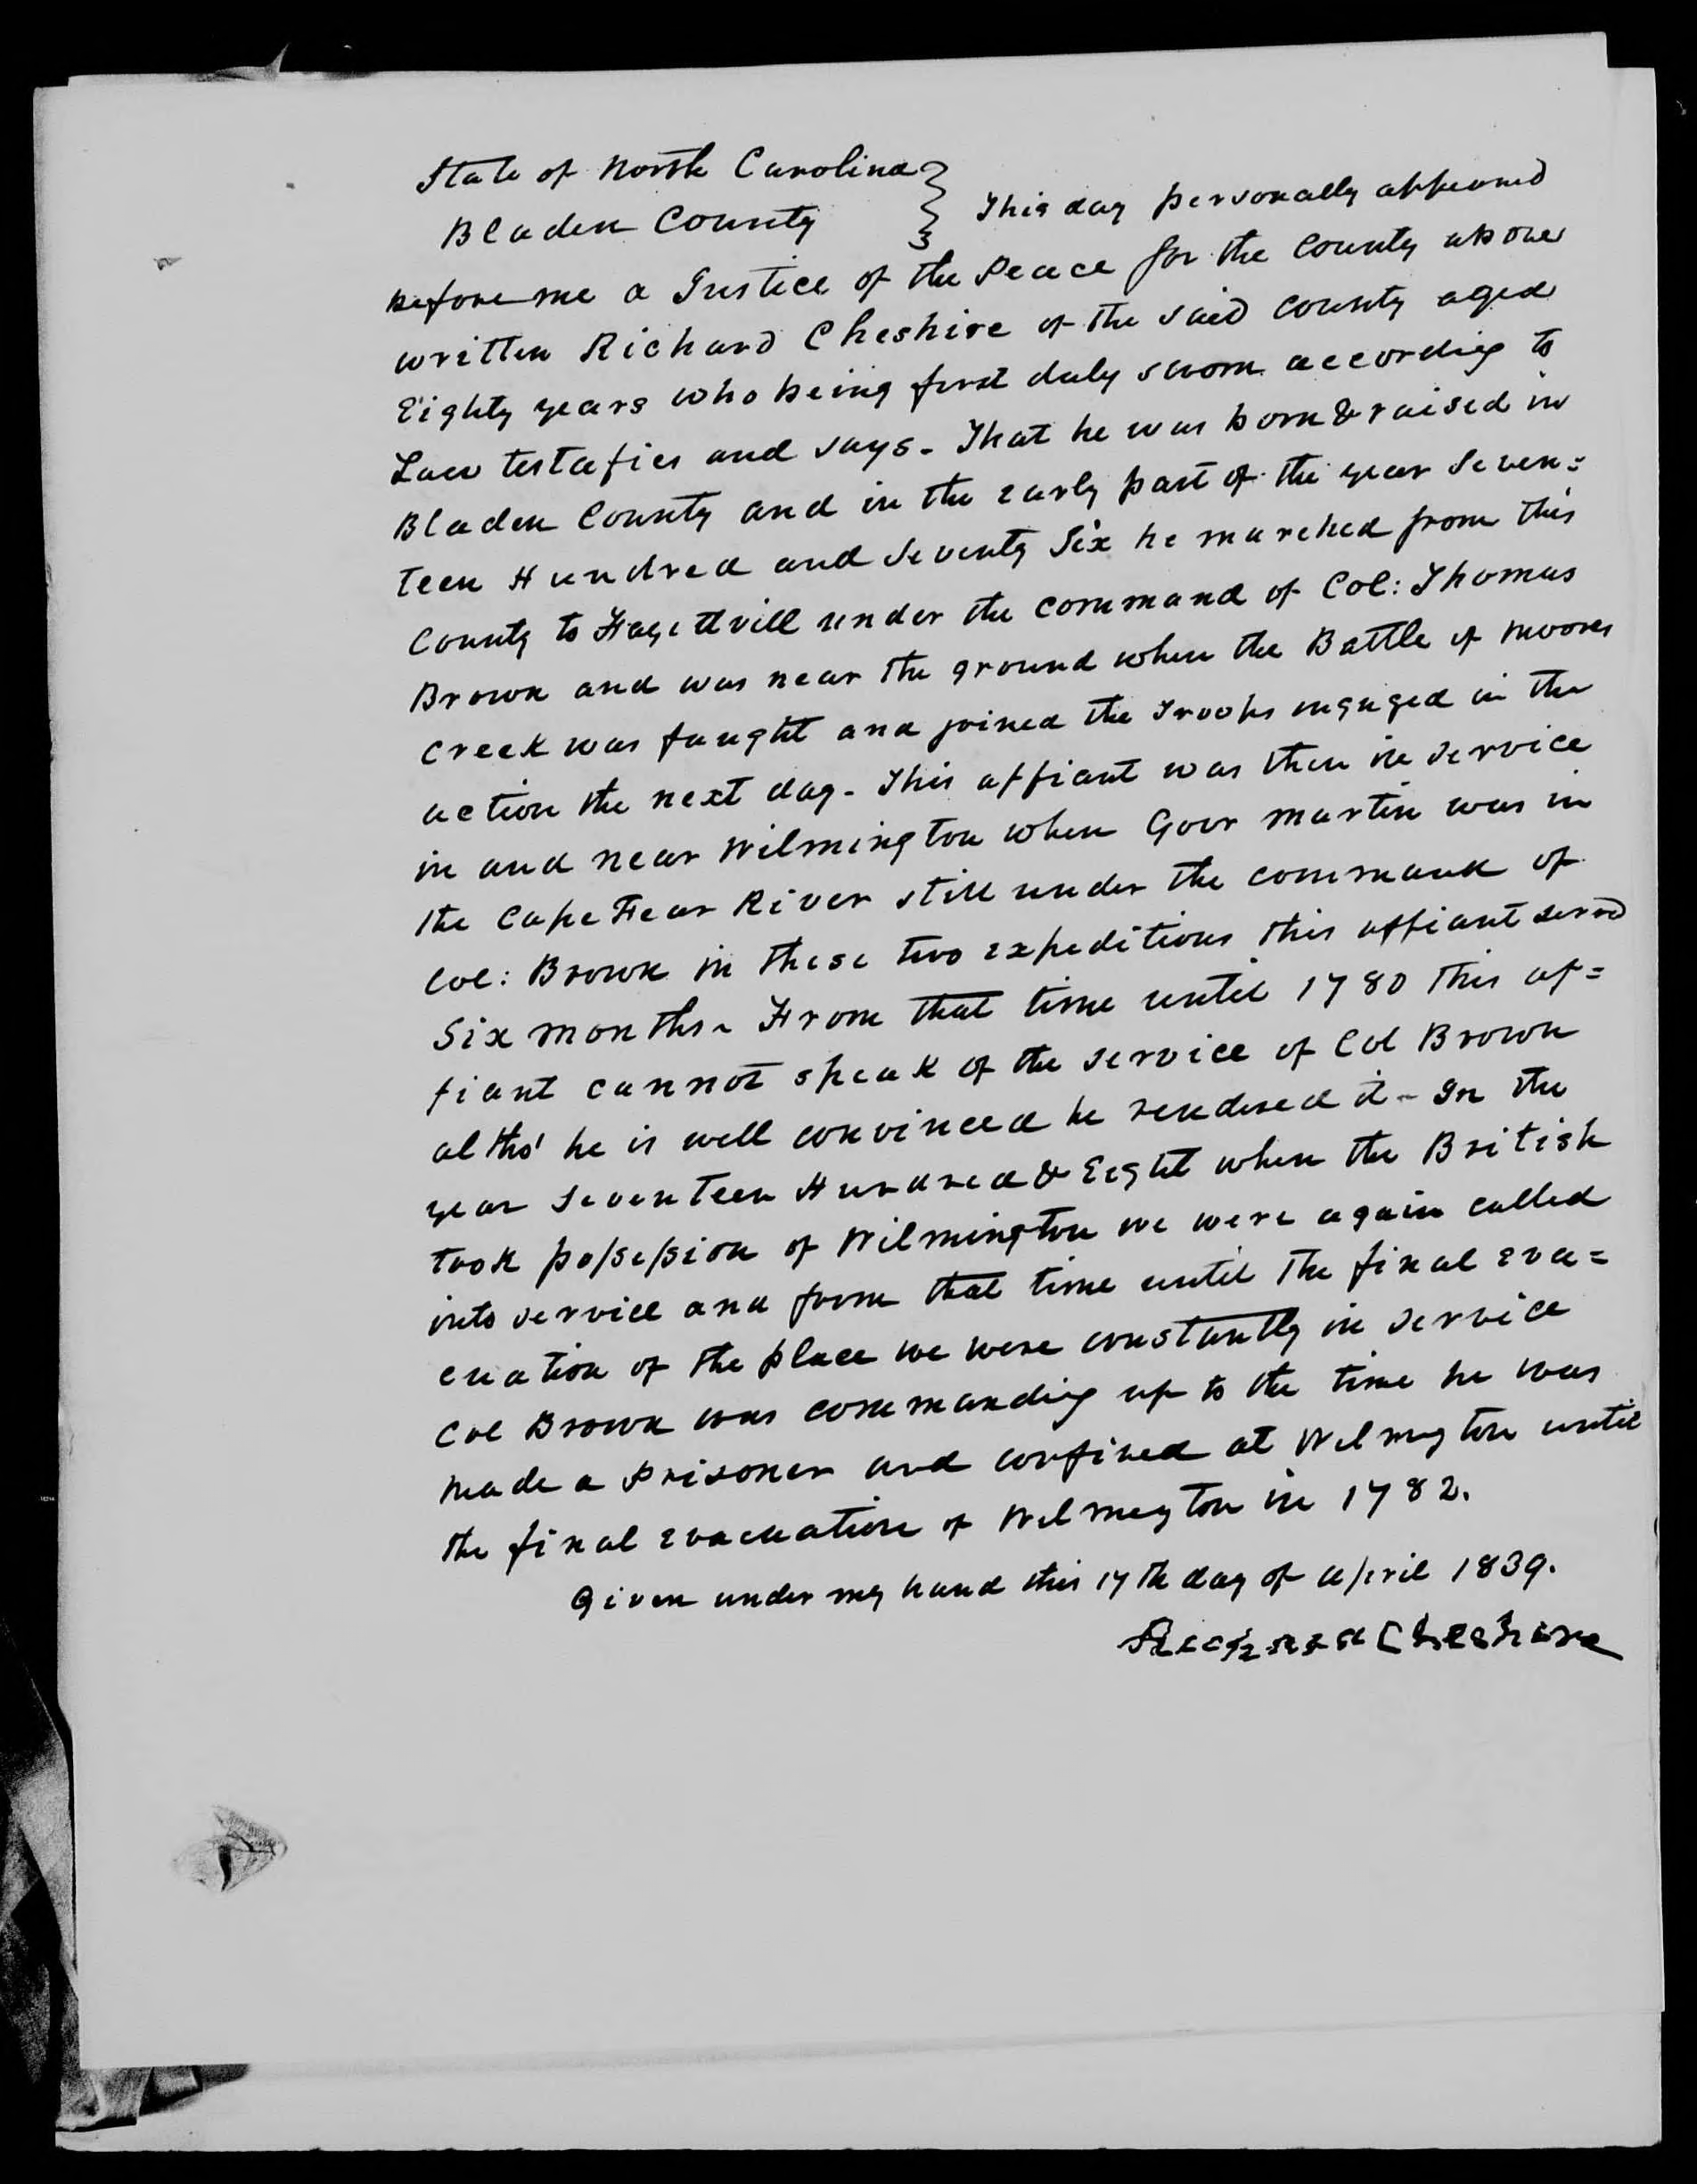 Affidavit of Richard Cheshire in support of a Pension Claim for Lucy Brown, 17 April 1839, page 1